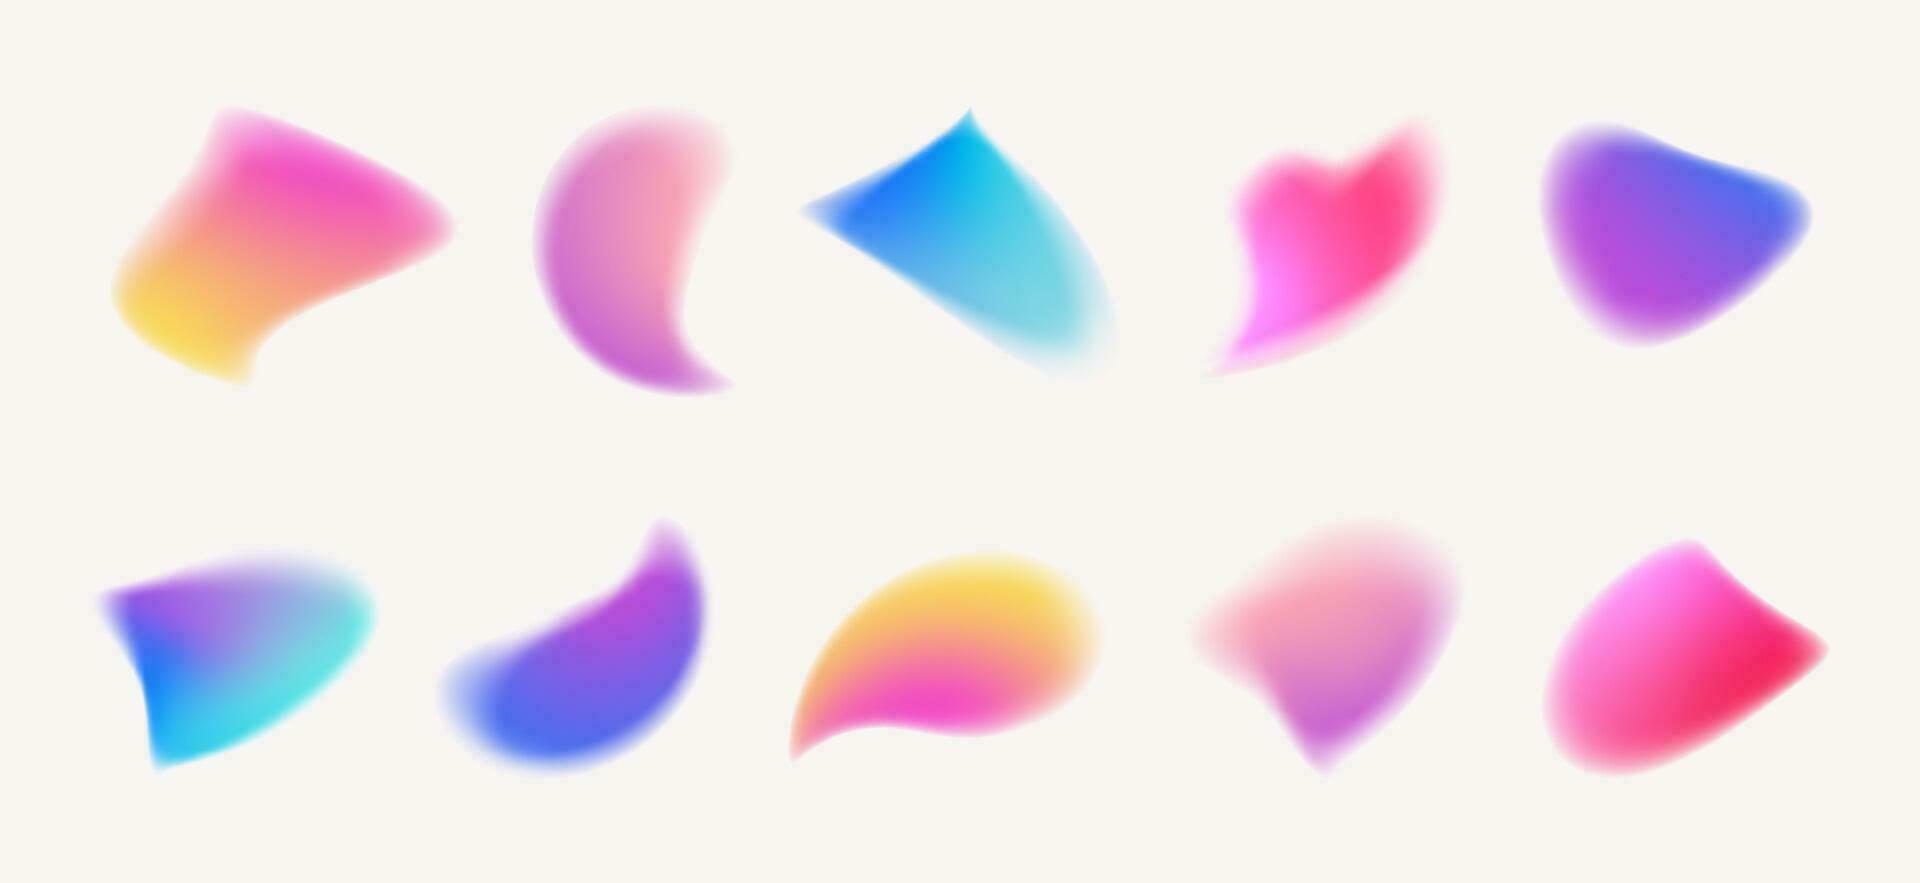 Y2k style blurred gradient abstract shapes set. Blurry organic shapes, aura aesthetic elements. Modern minimalist design elements with blur gradients. Vector illustration.